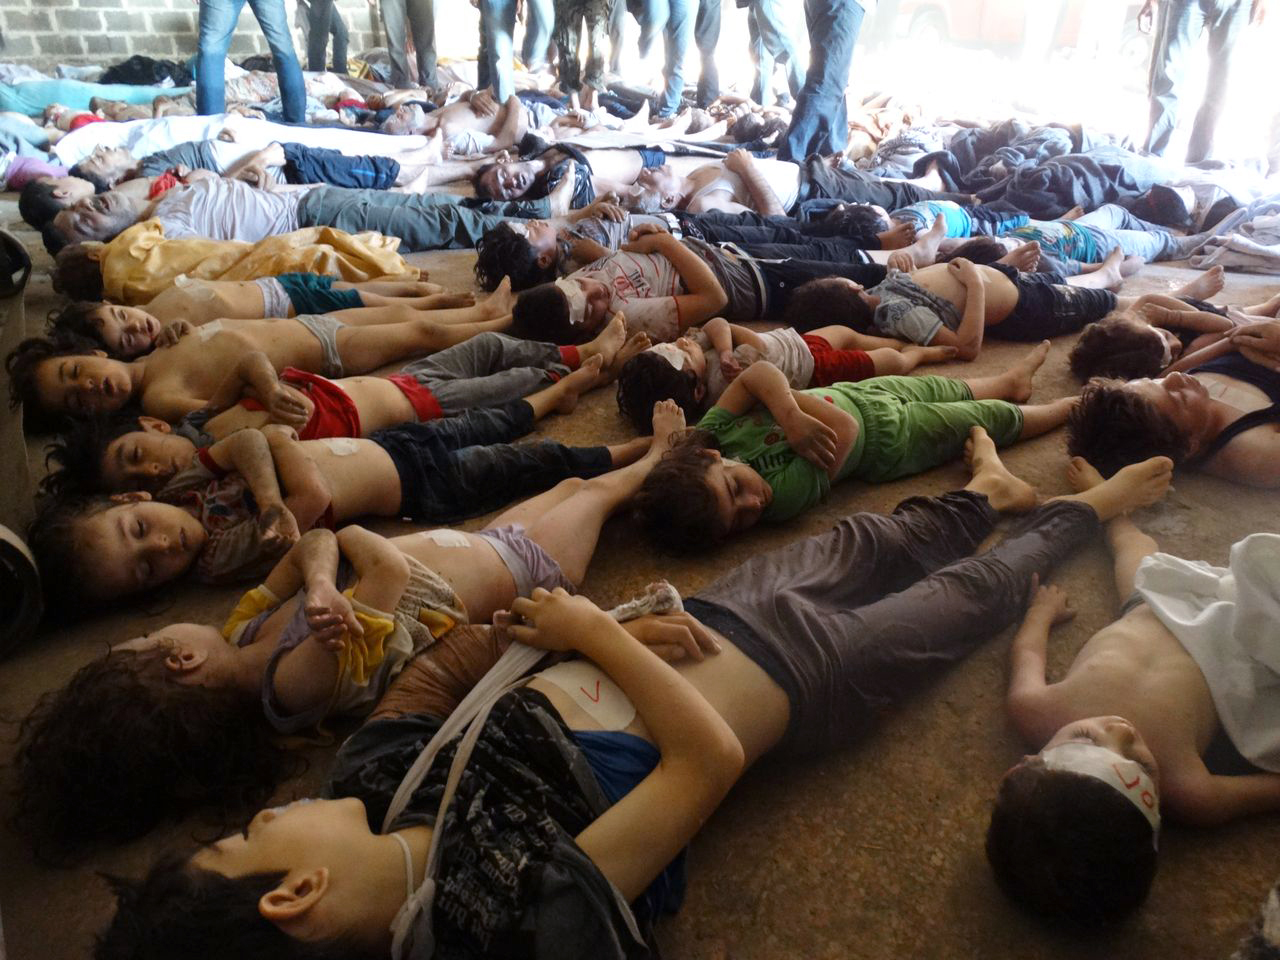  Dead children, among 355 others killed, after a sarin gas attack, in Eastern Ghouta, August 21st, 2013. 